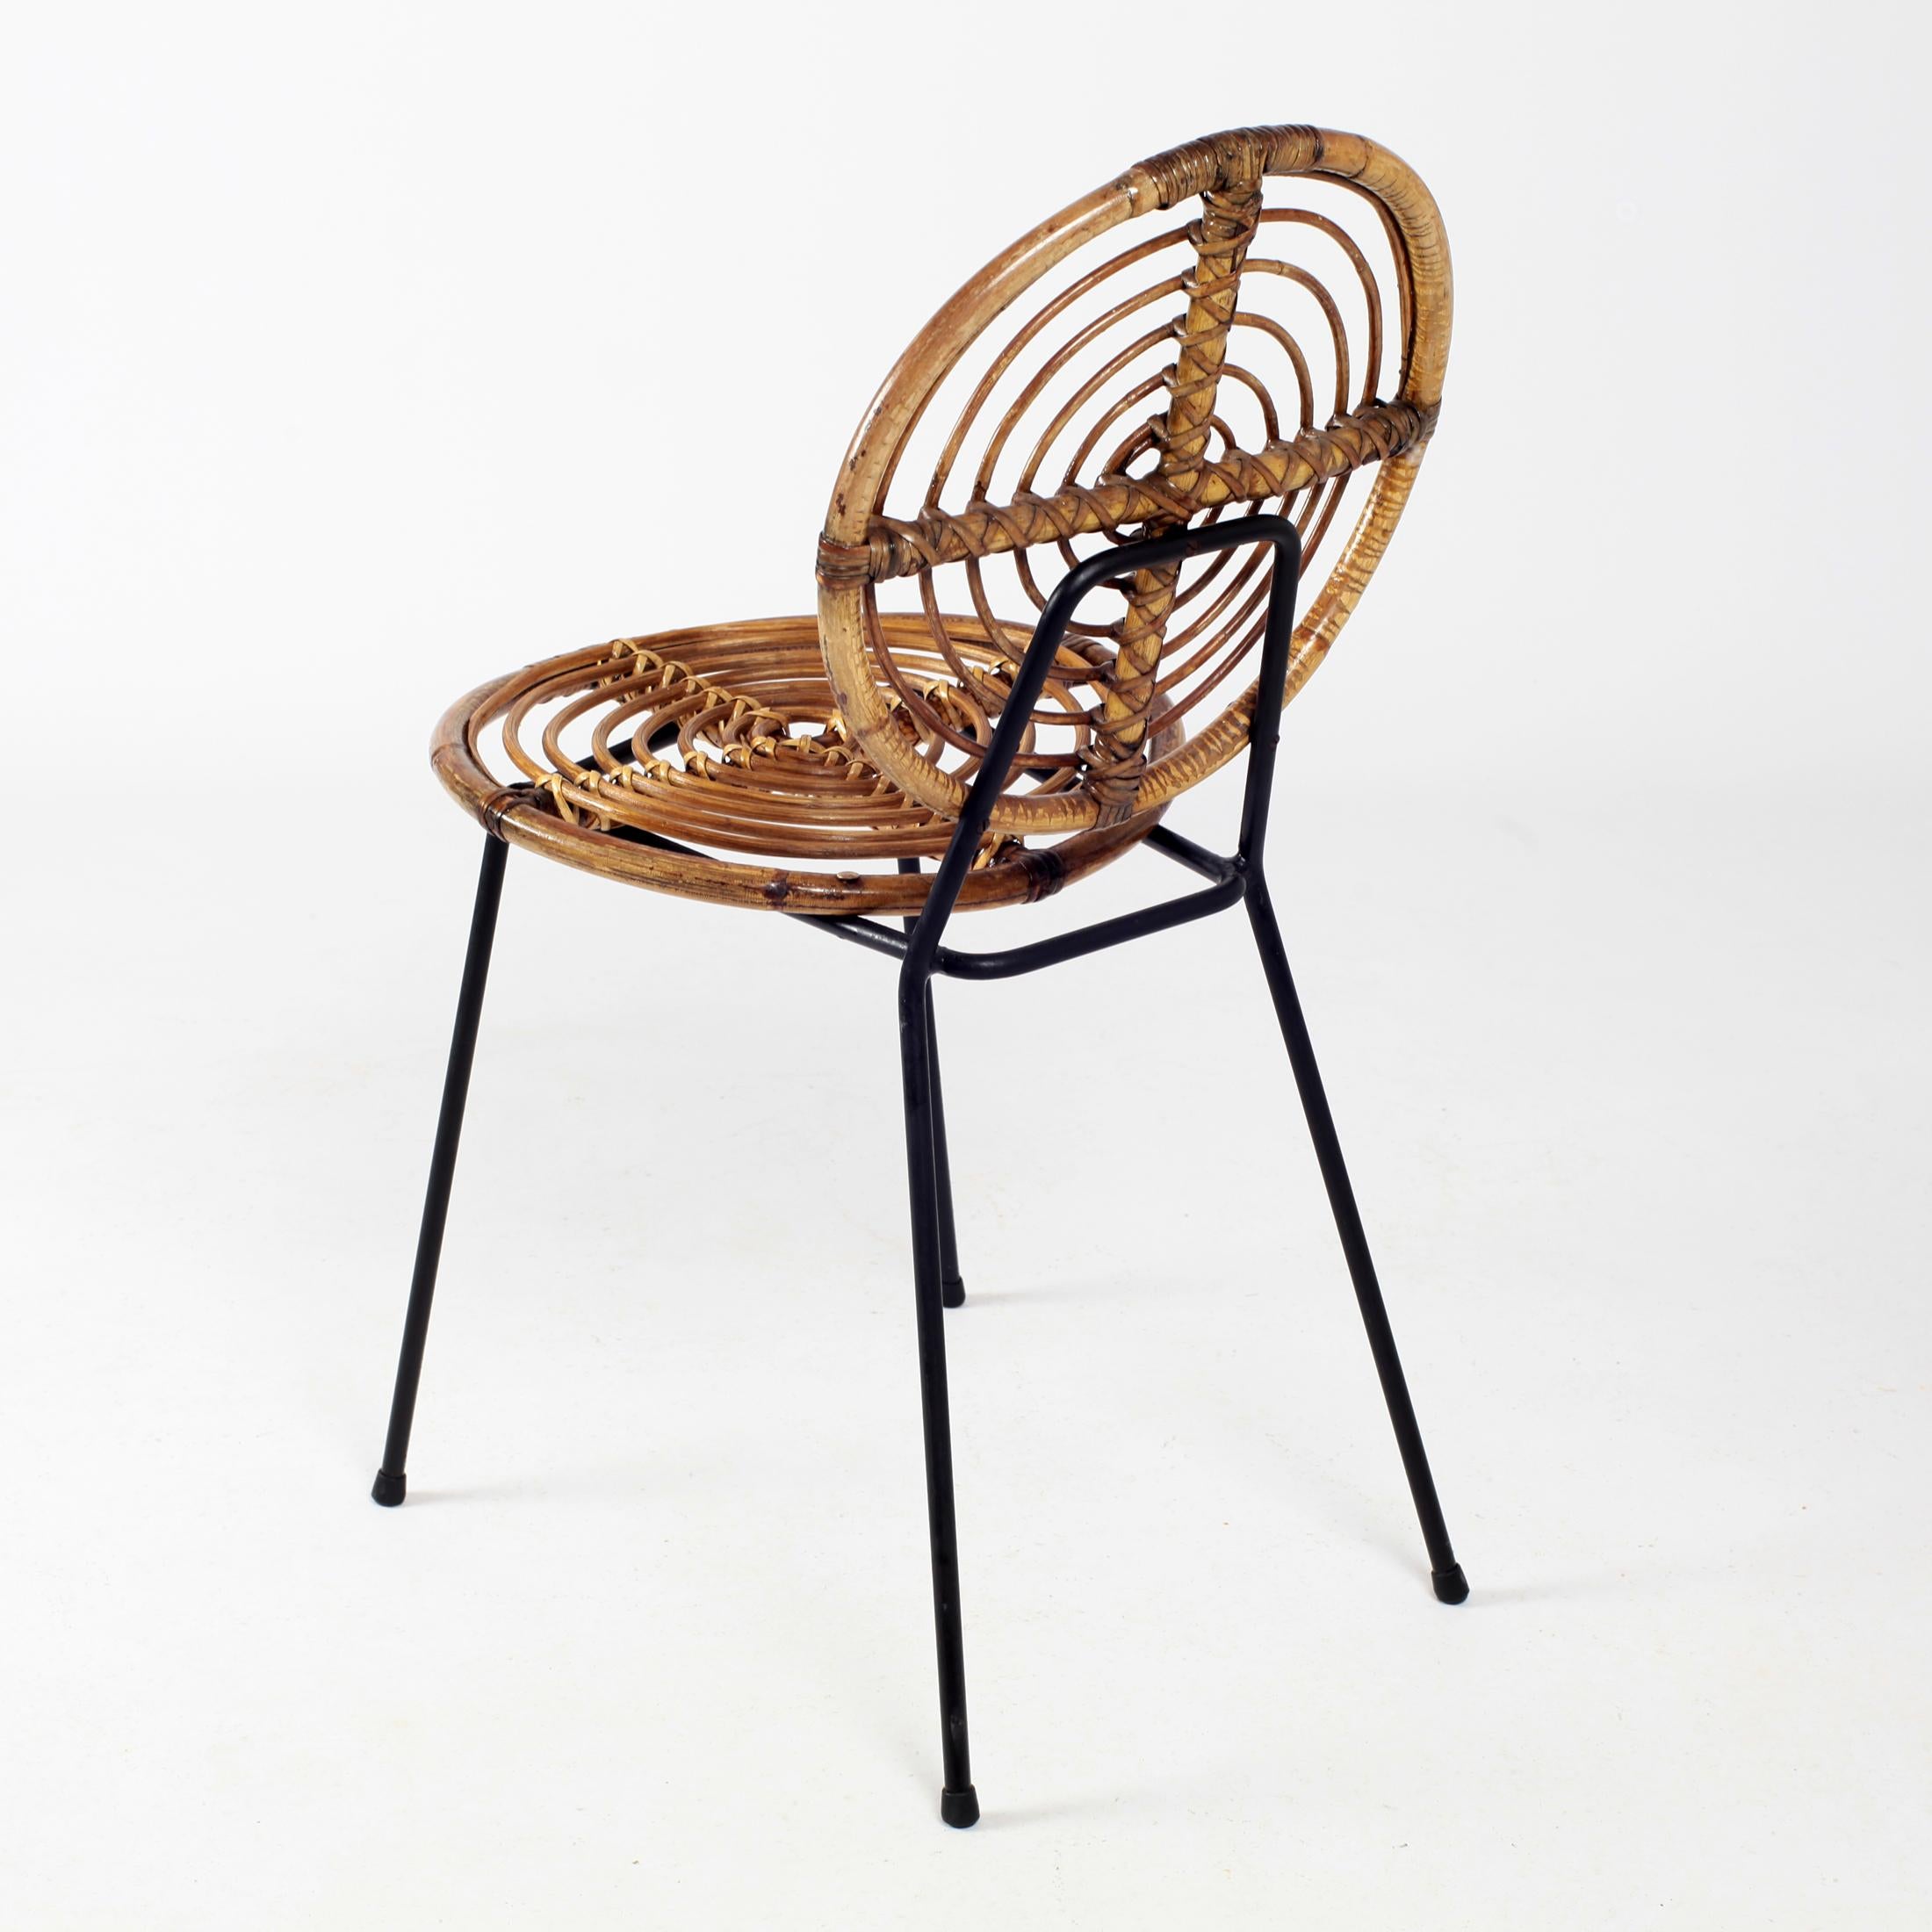 Mid-Century Modern Thonet Rattan Chairs CM166 on Black Metal Base, 1950s France 2 available